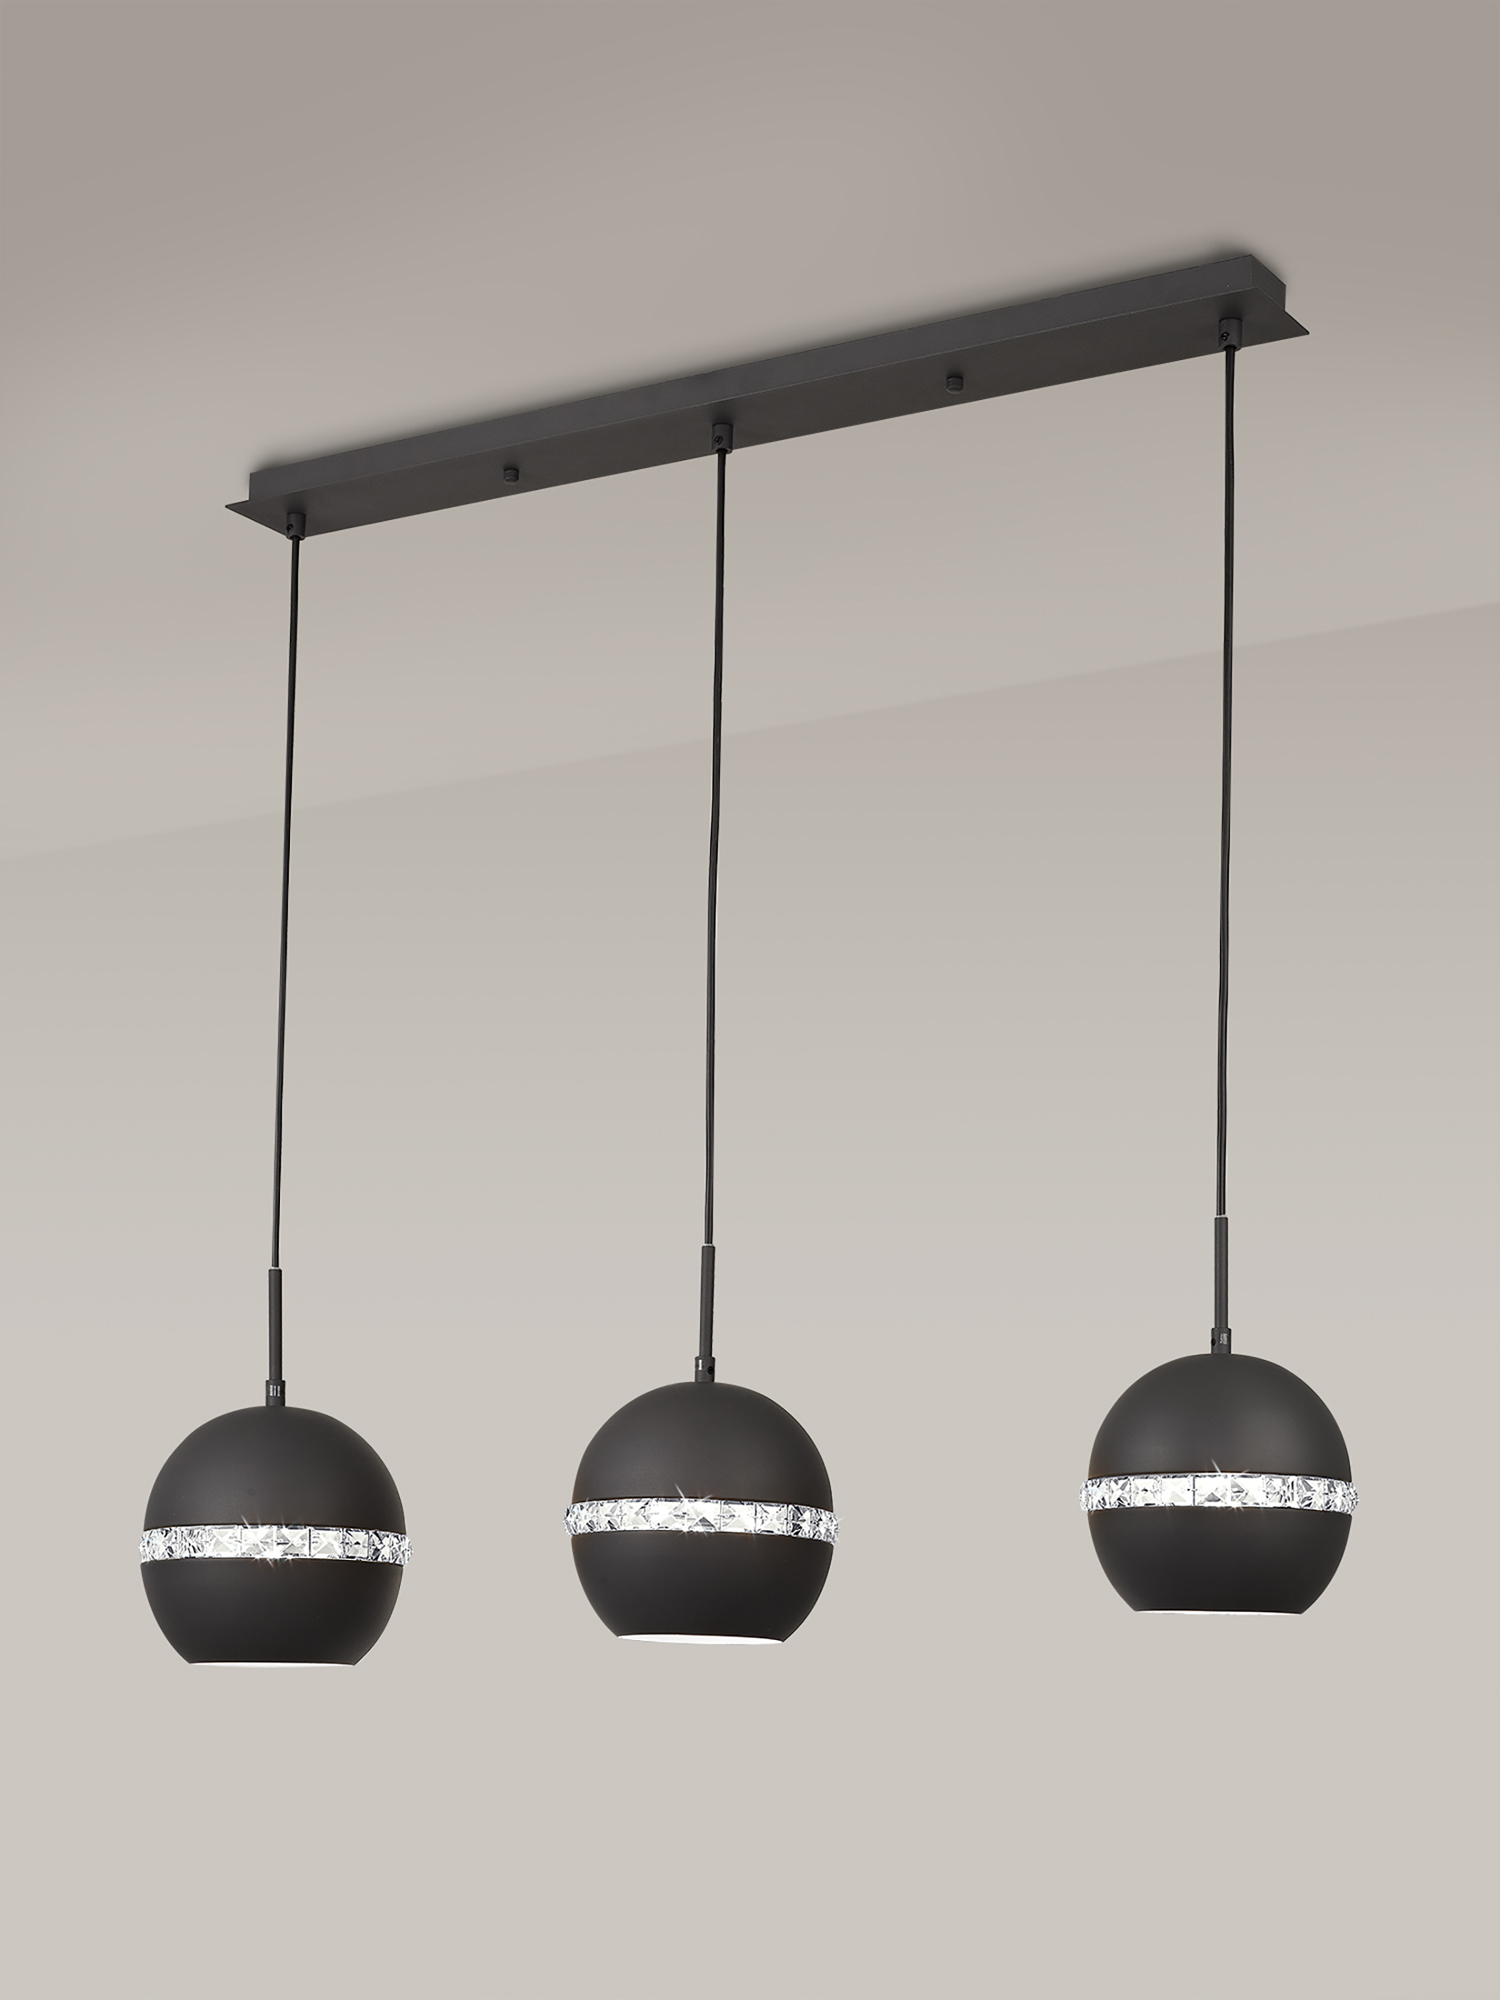 Andrea Graphite Crystal Ceiling Lights Diyas Linear Crystal Fittings